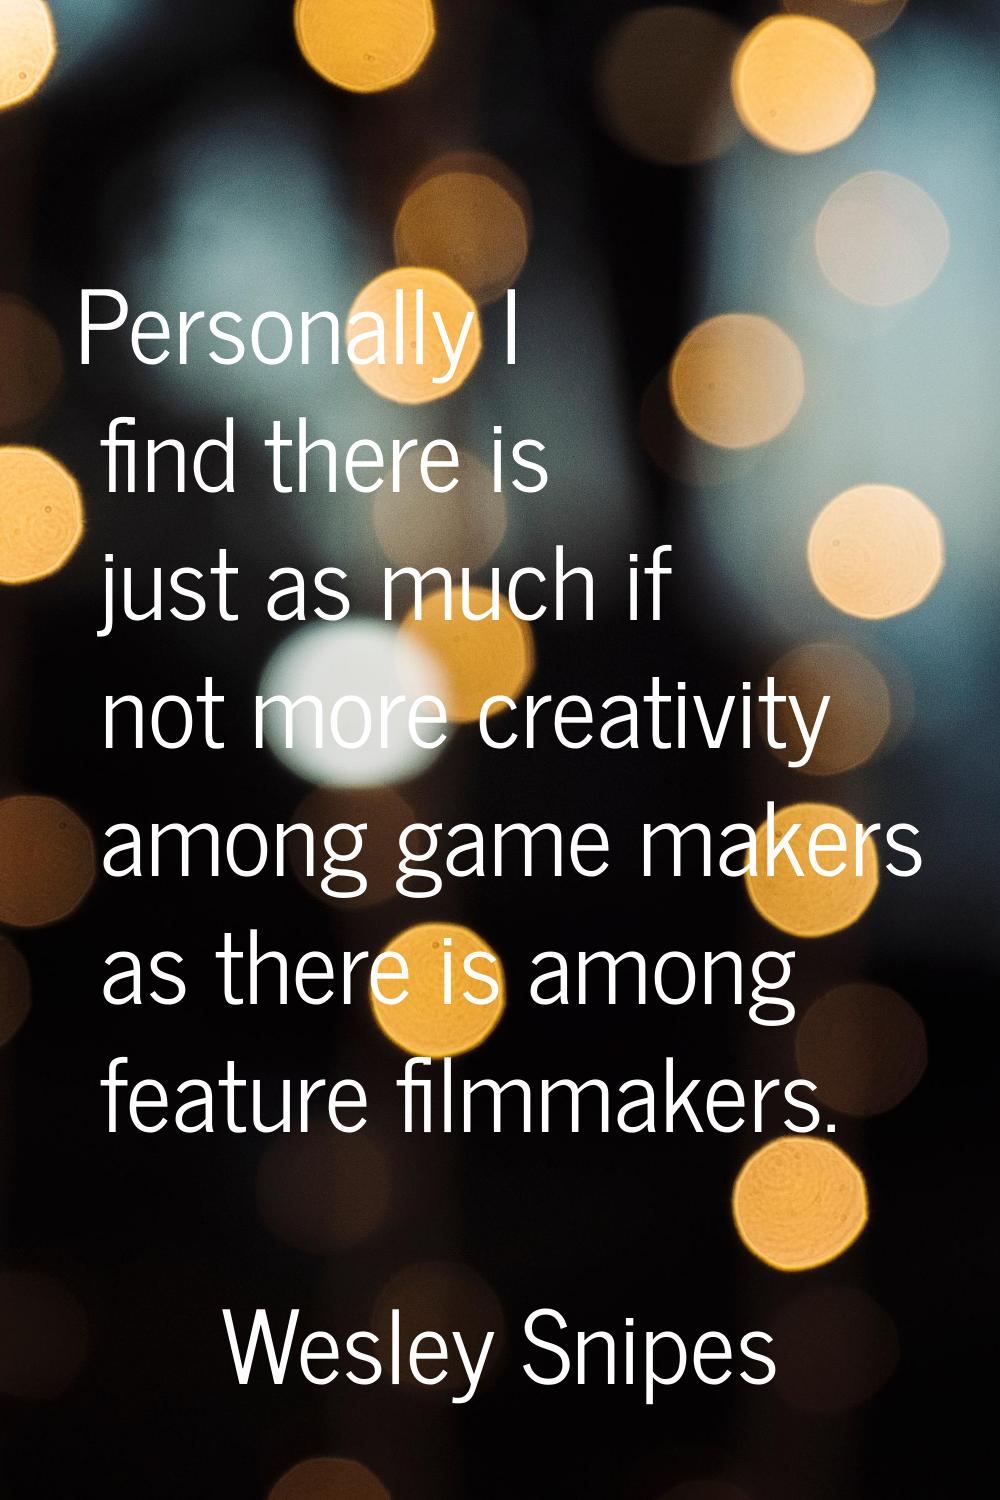 Personally I find there is just as much if not more creativity among game makers as there is among 